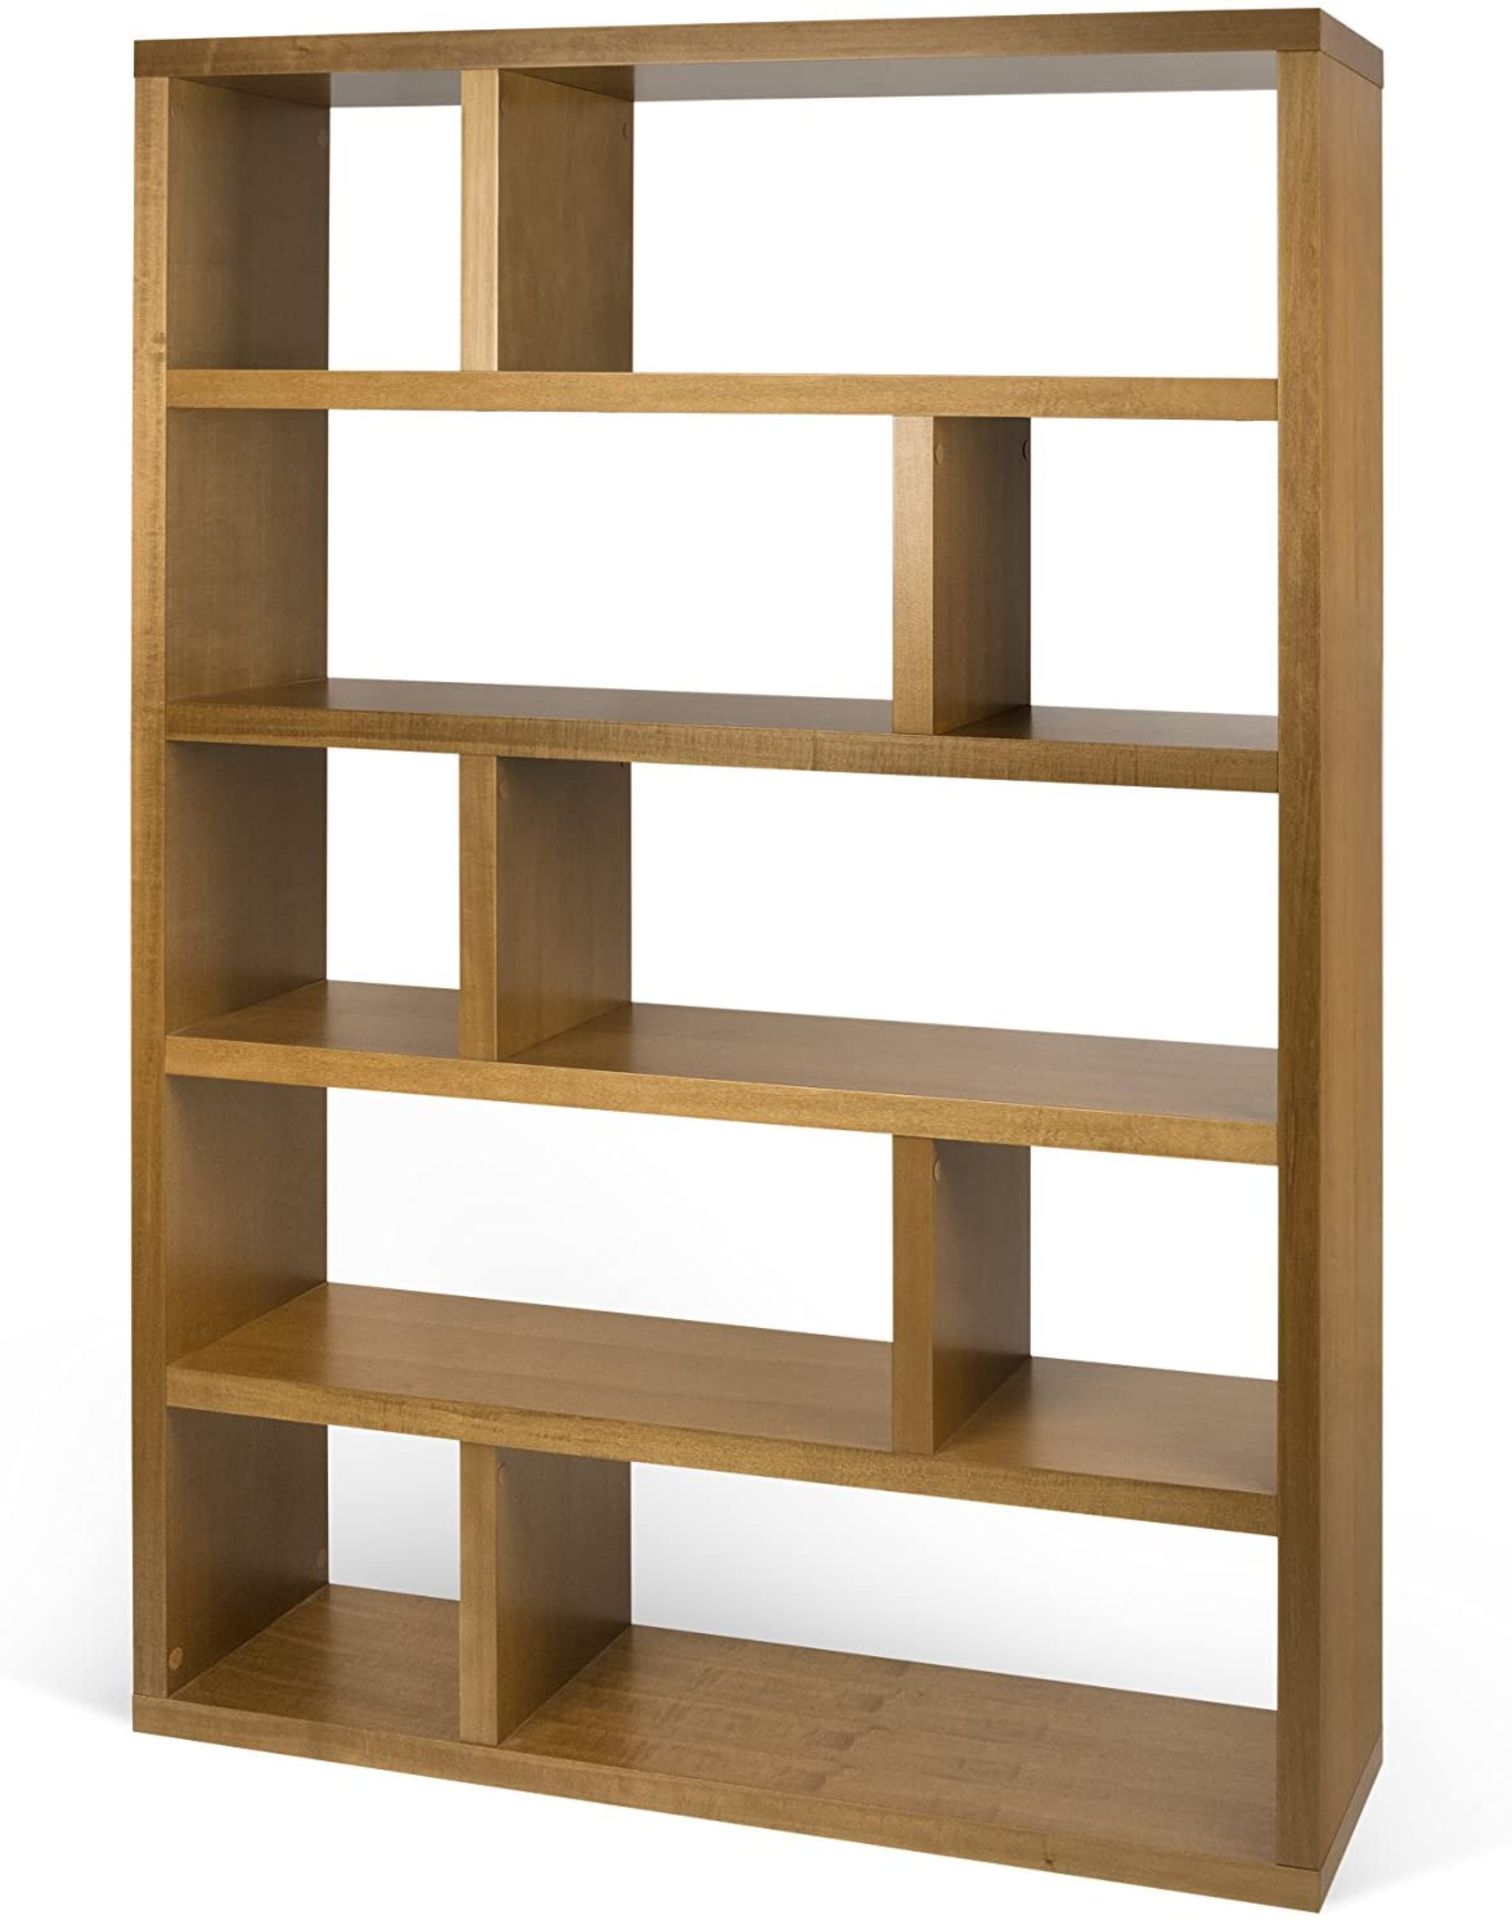 1 x Comtempoary High Shelving Unit - Mukali - Dimensions: 47W x 11D x 68H Inches - New Boxed Stock - Image 3 of 3